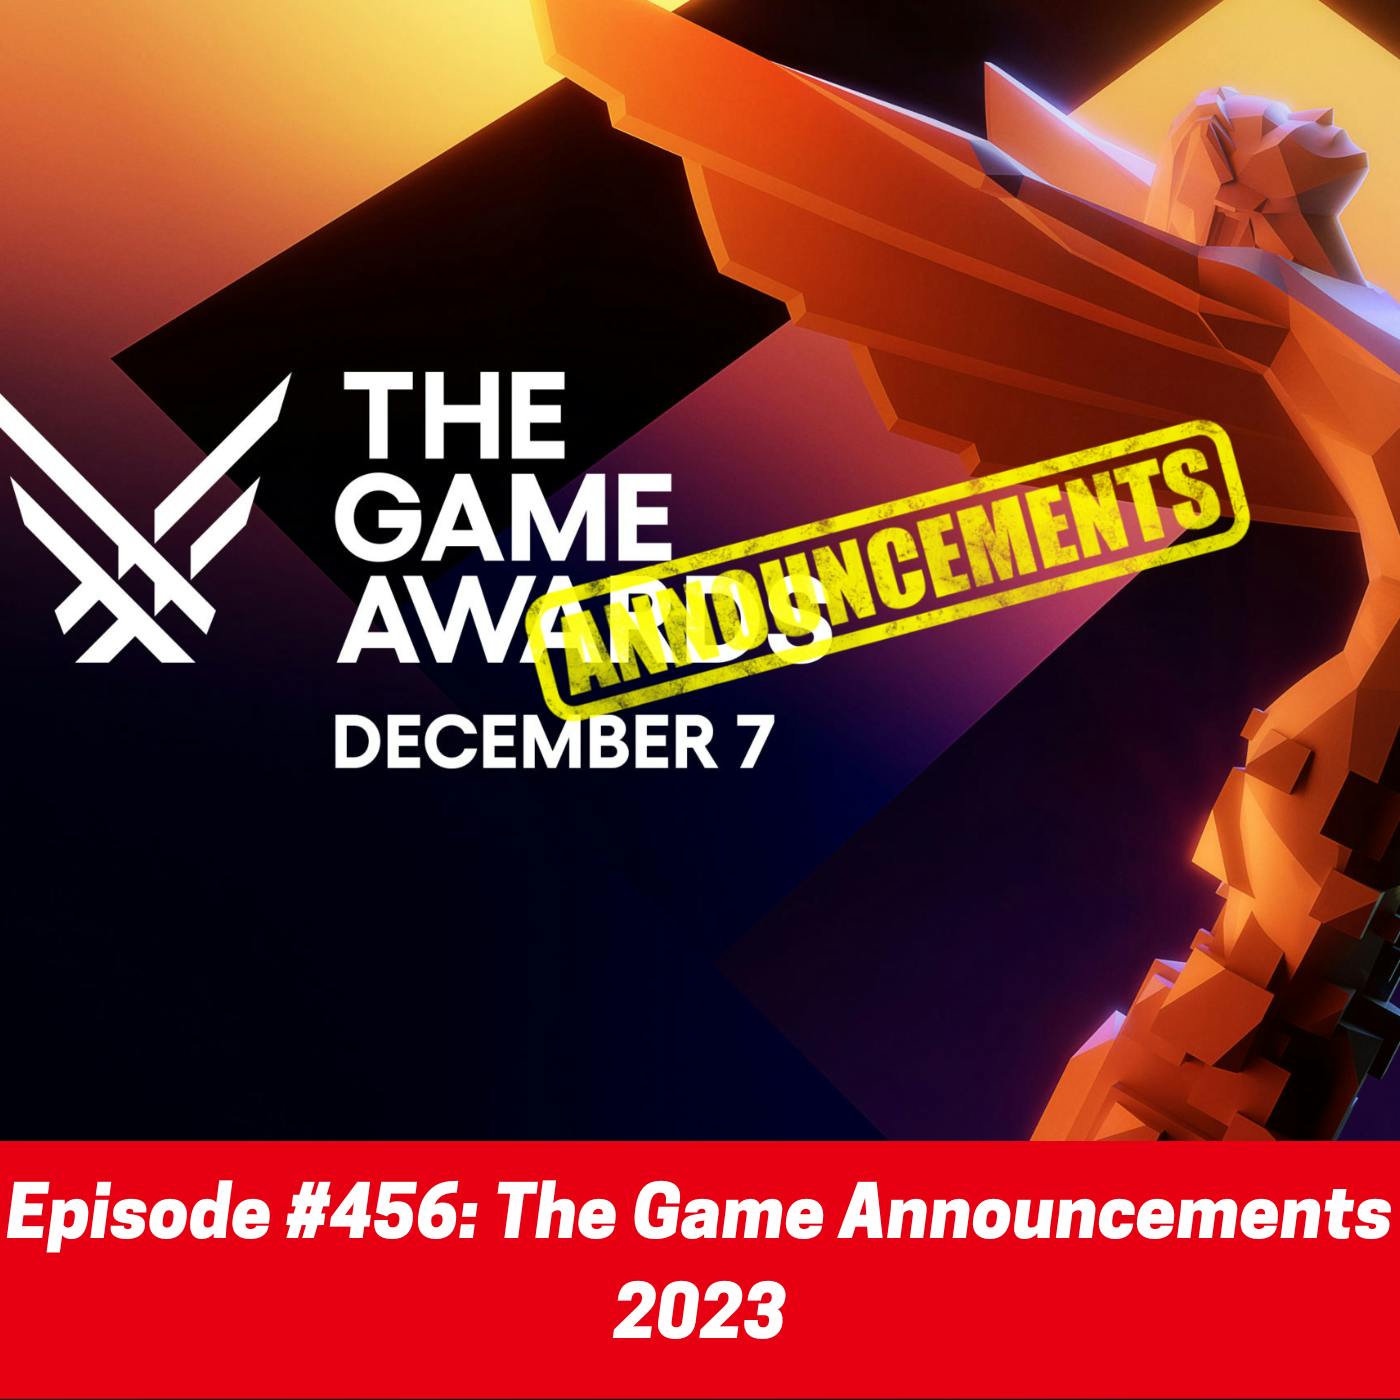 #456: The Game Announcements 2023